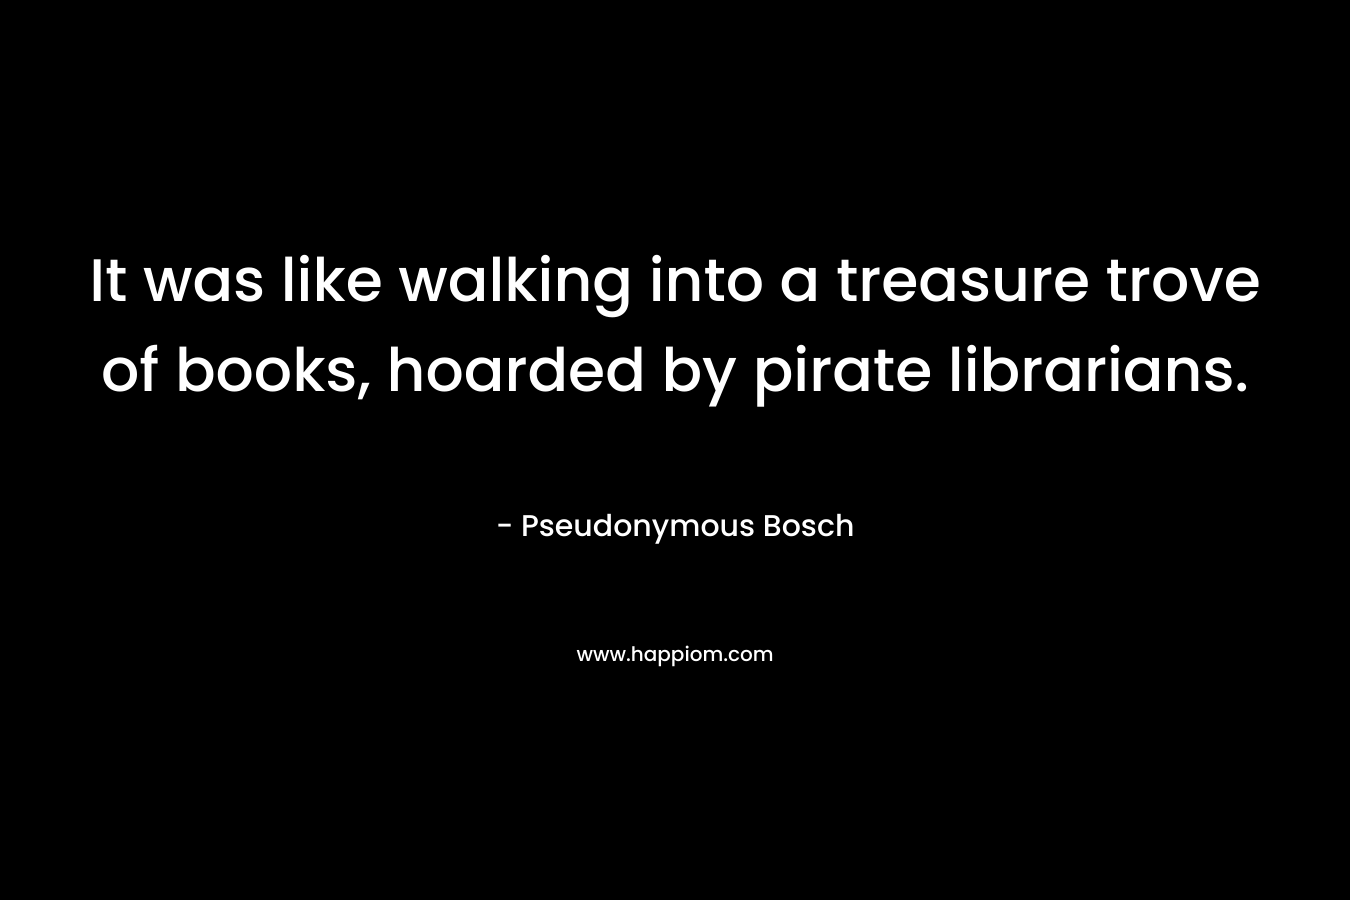 It was like walking into a treasure trove of books, hoarded by pirate librarians. – Pseudonymous Bosch